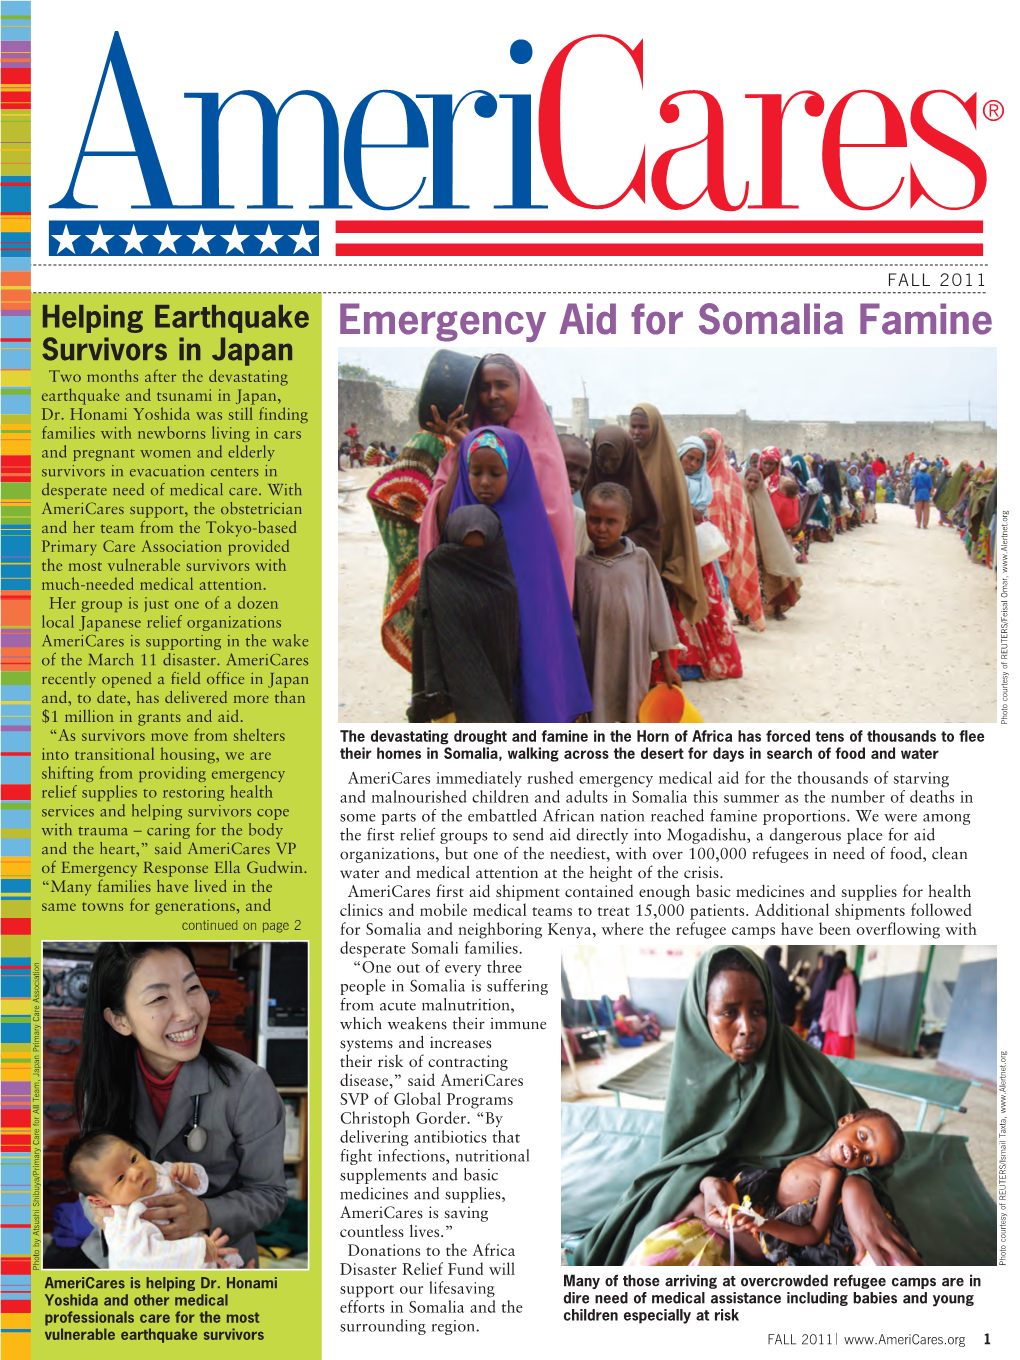 Emergency Aid for Somalia Famine Survivors in Japan Two Months After the Devastating Earthquake and Tsunami in Japan, Dr